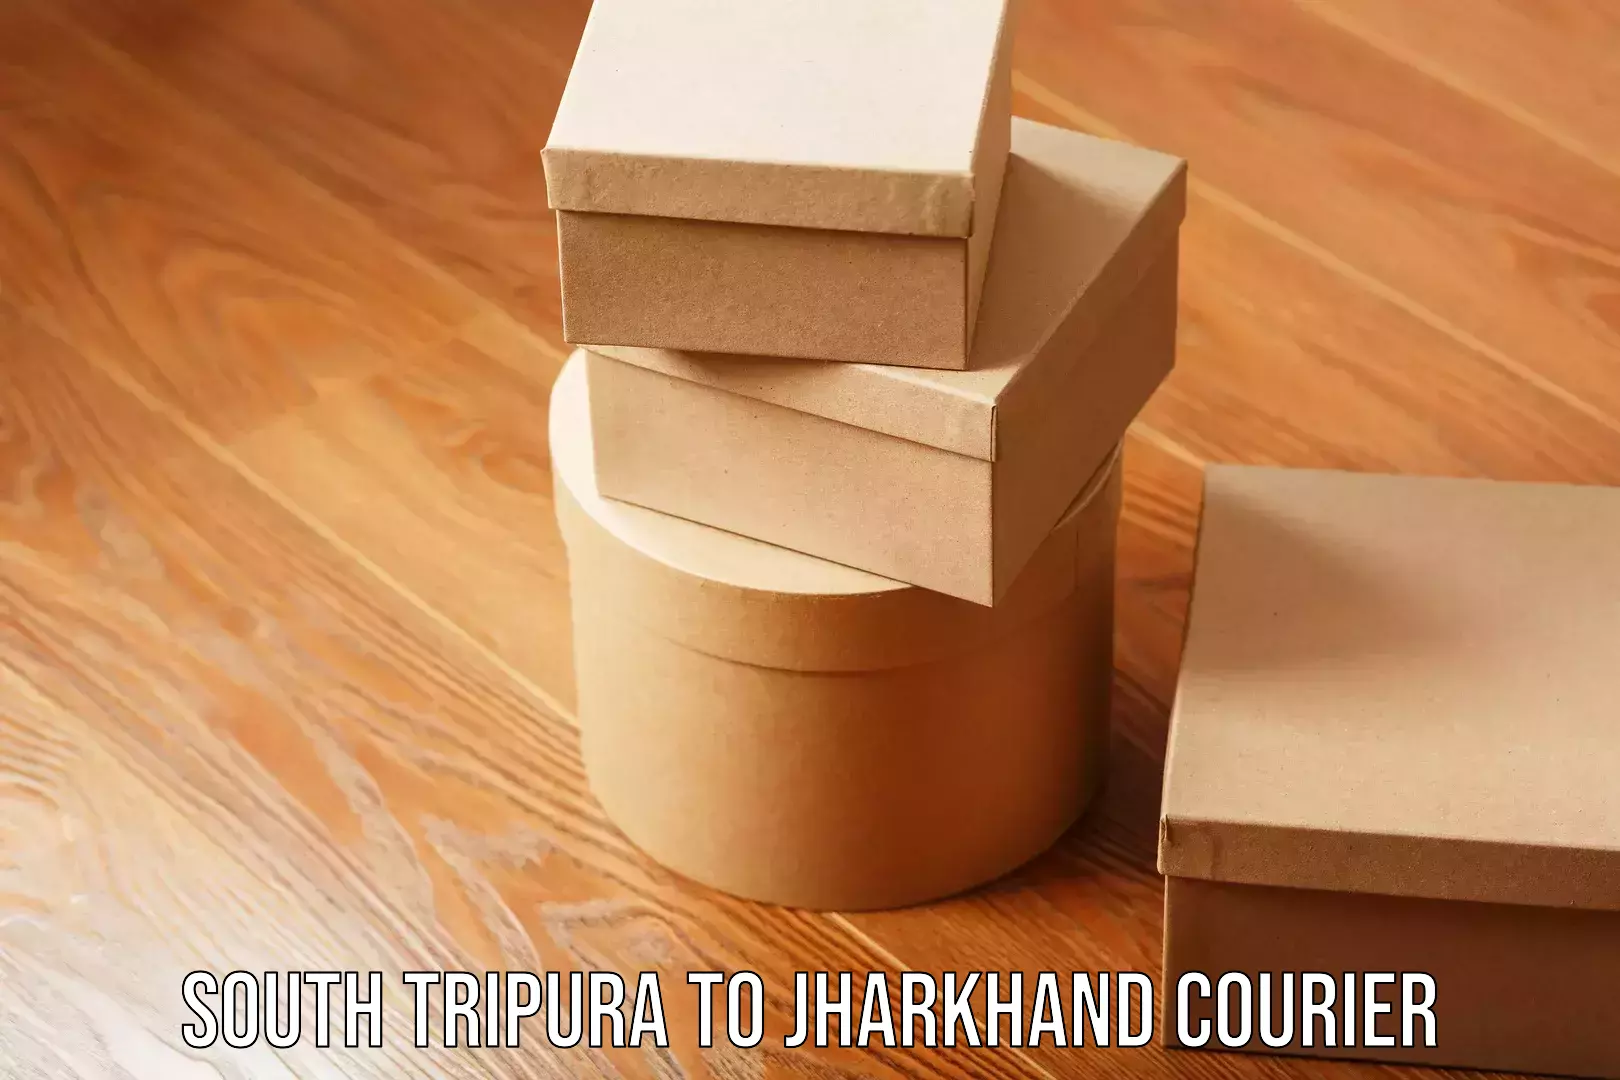 Online package tracking South Tripura to Jharkhand